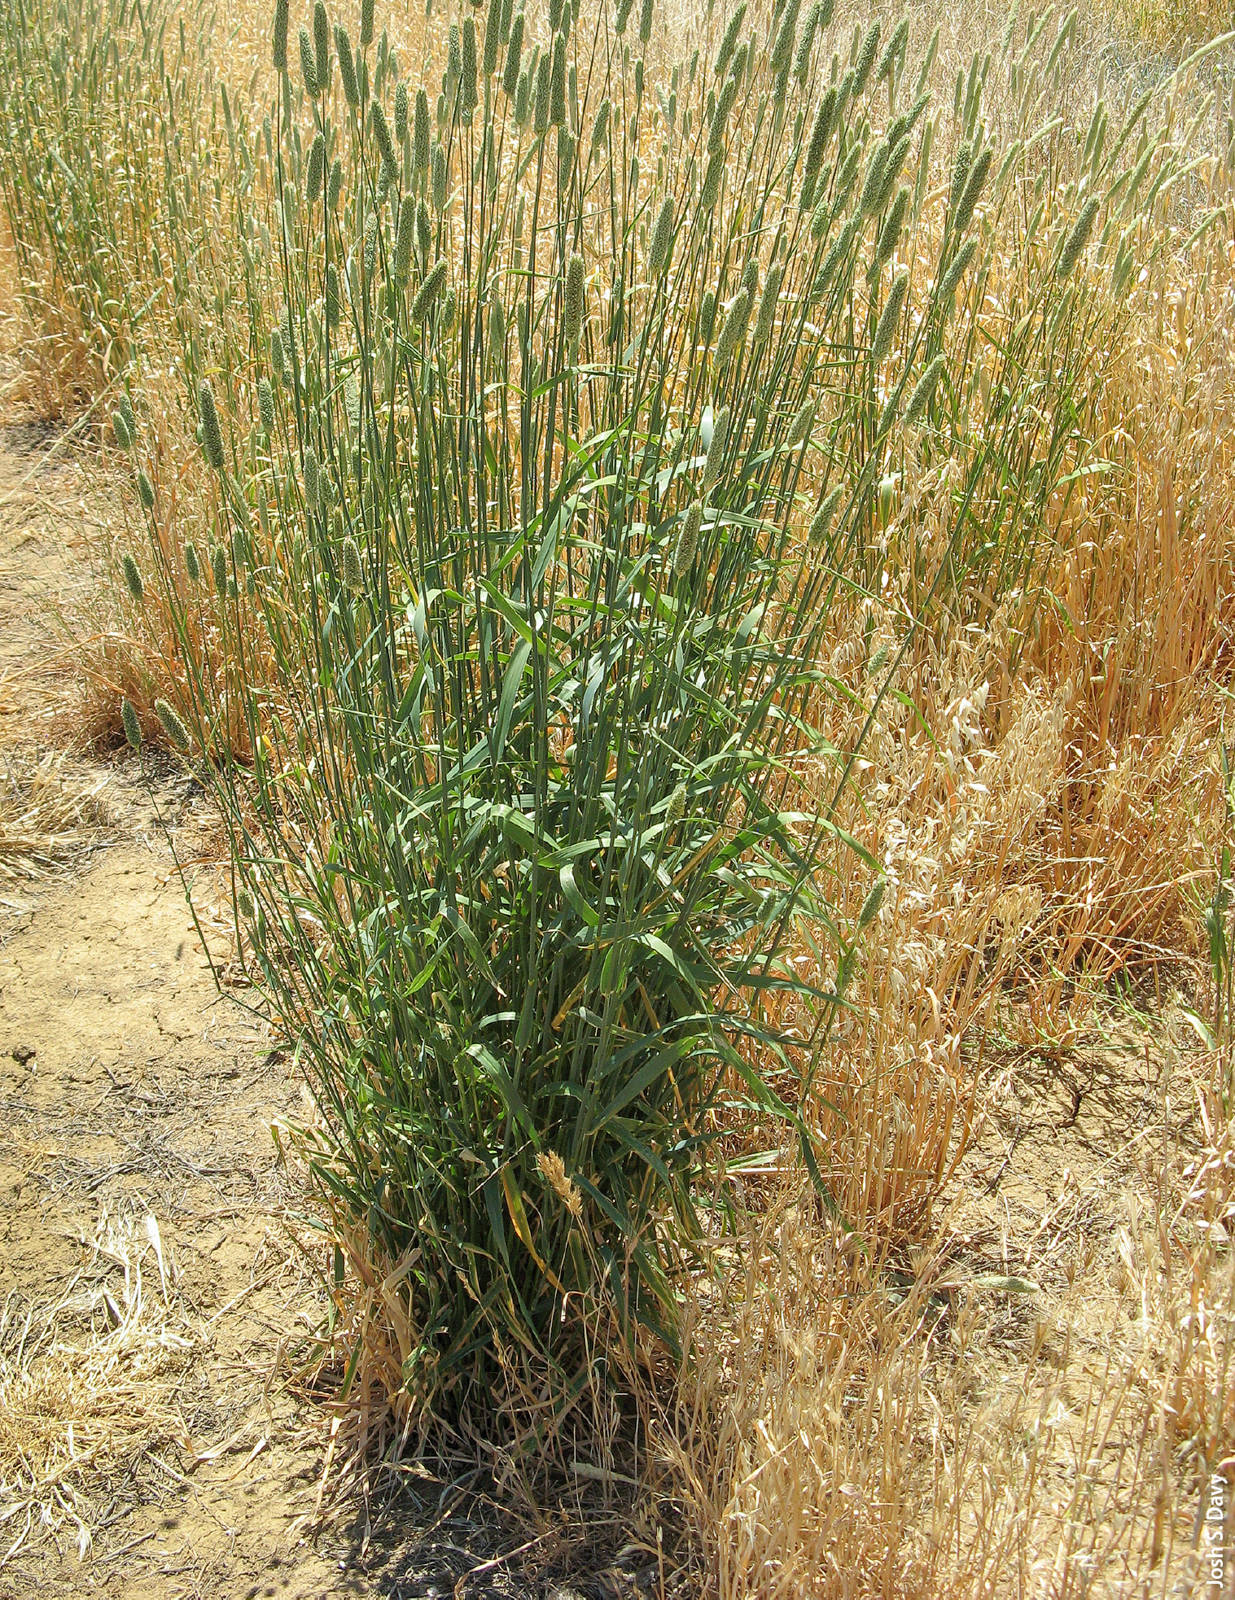 Holdfast hardinggrass, a perennial developed in Australia, proved to be a viable replacement for Perla koleagrass if Perla seeds are not available.